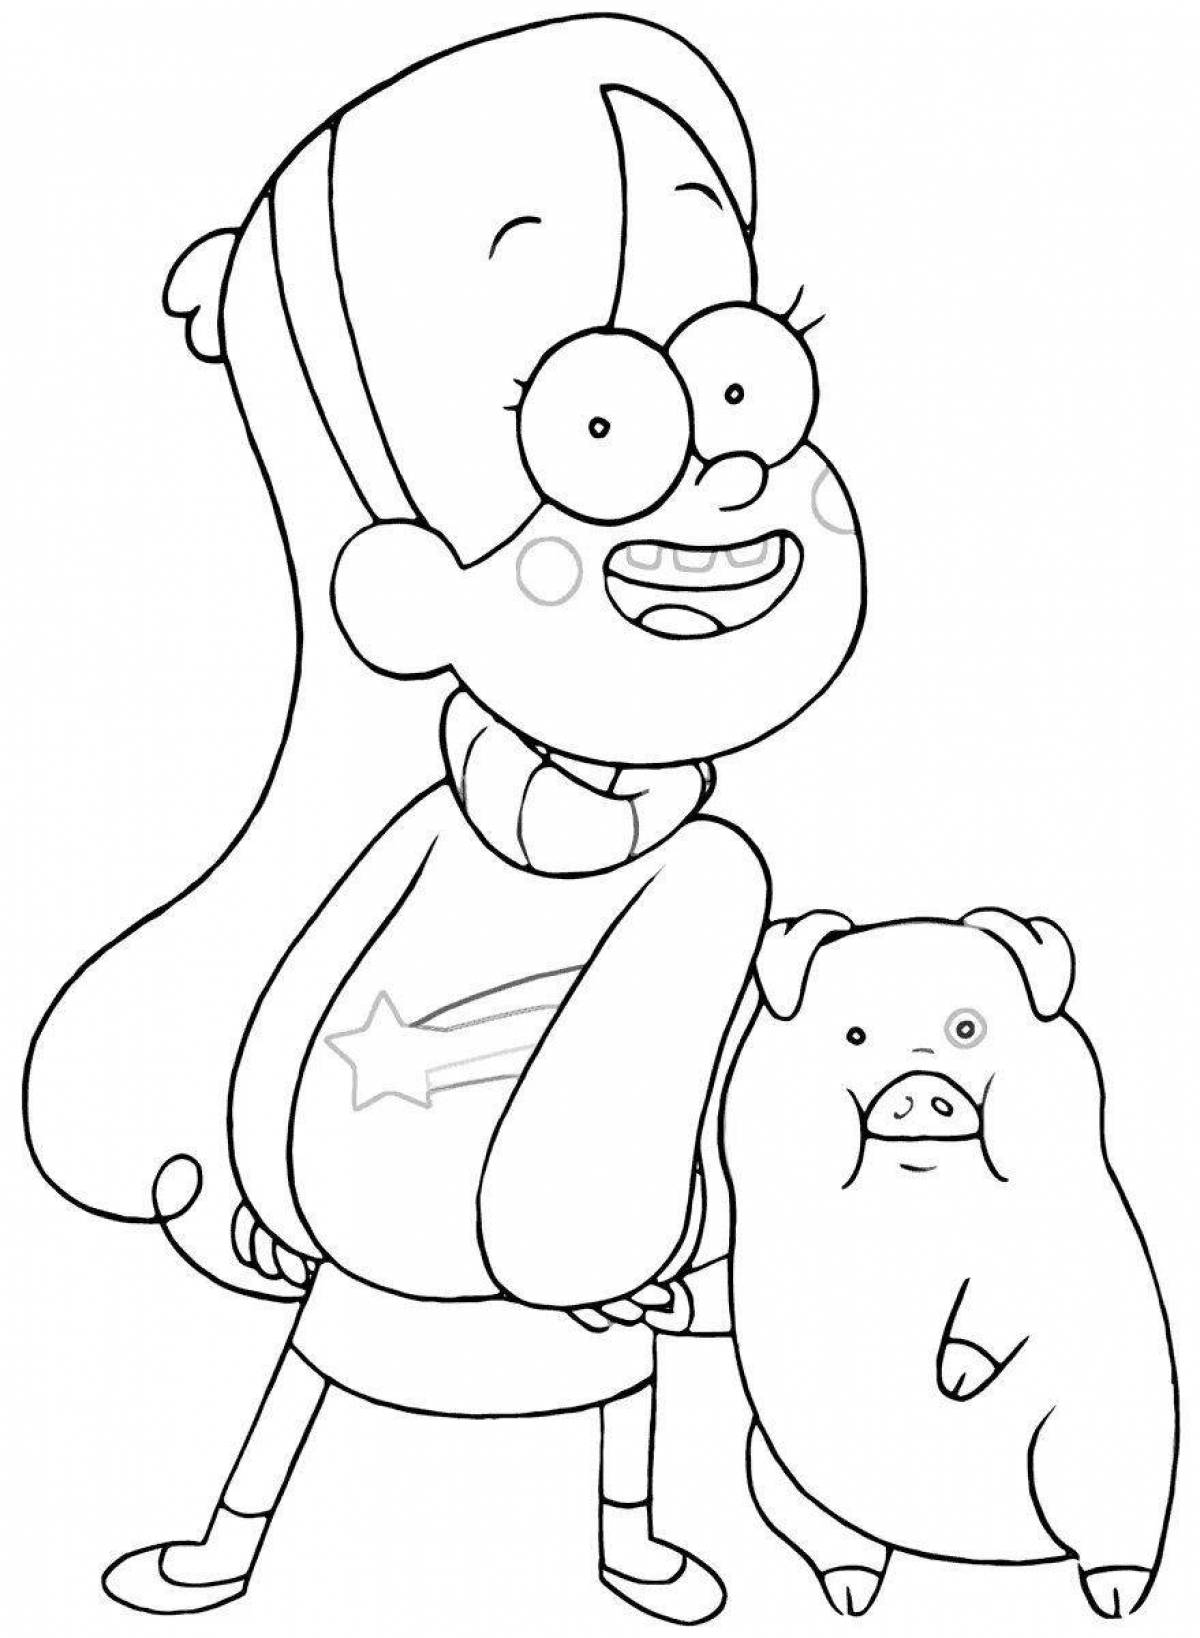 Gravity falls live coloring page